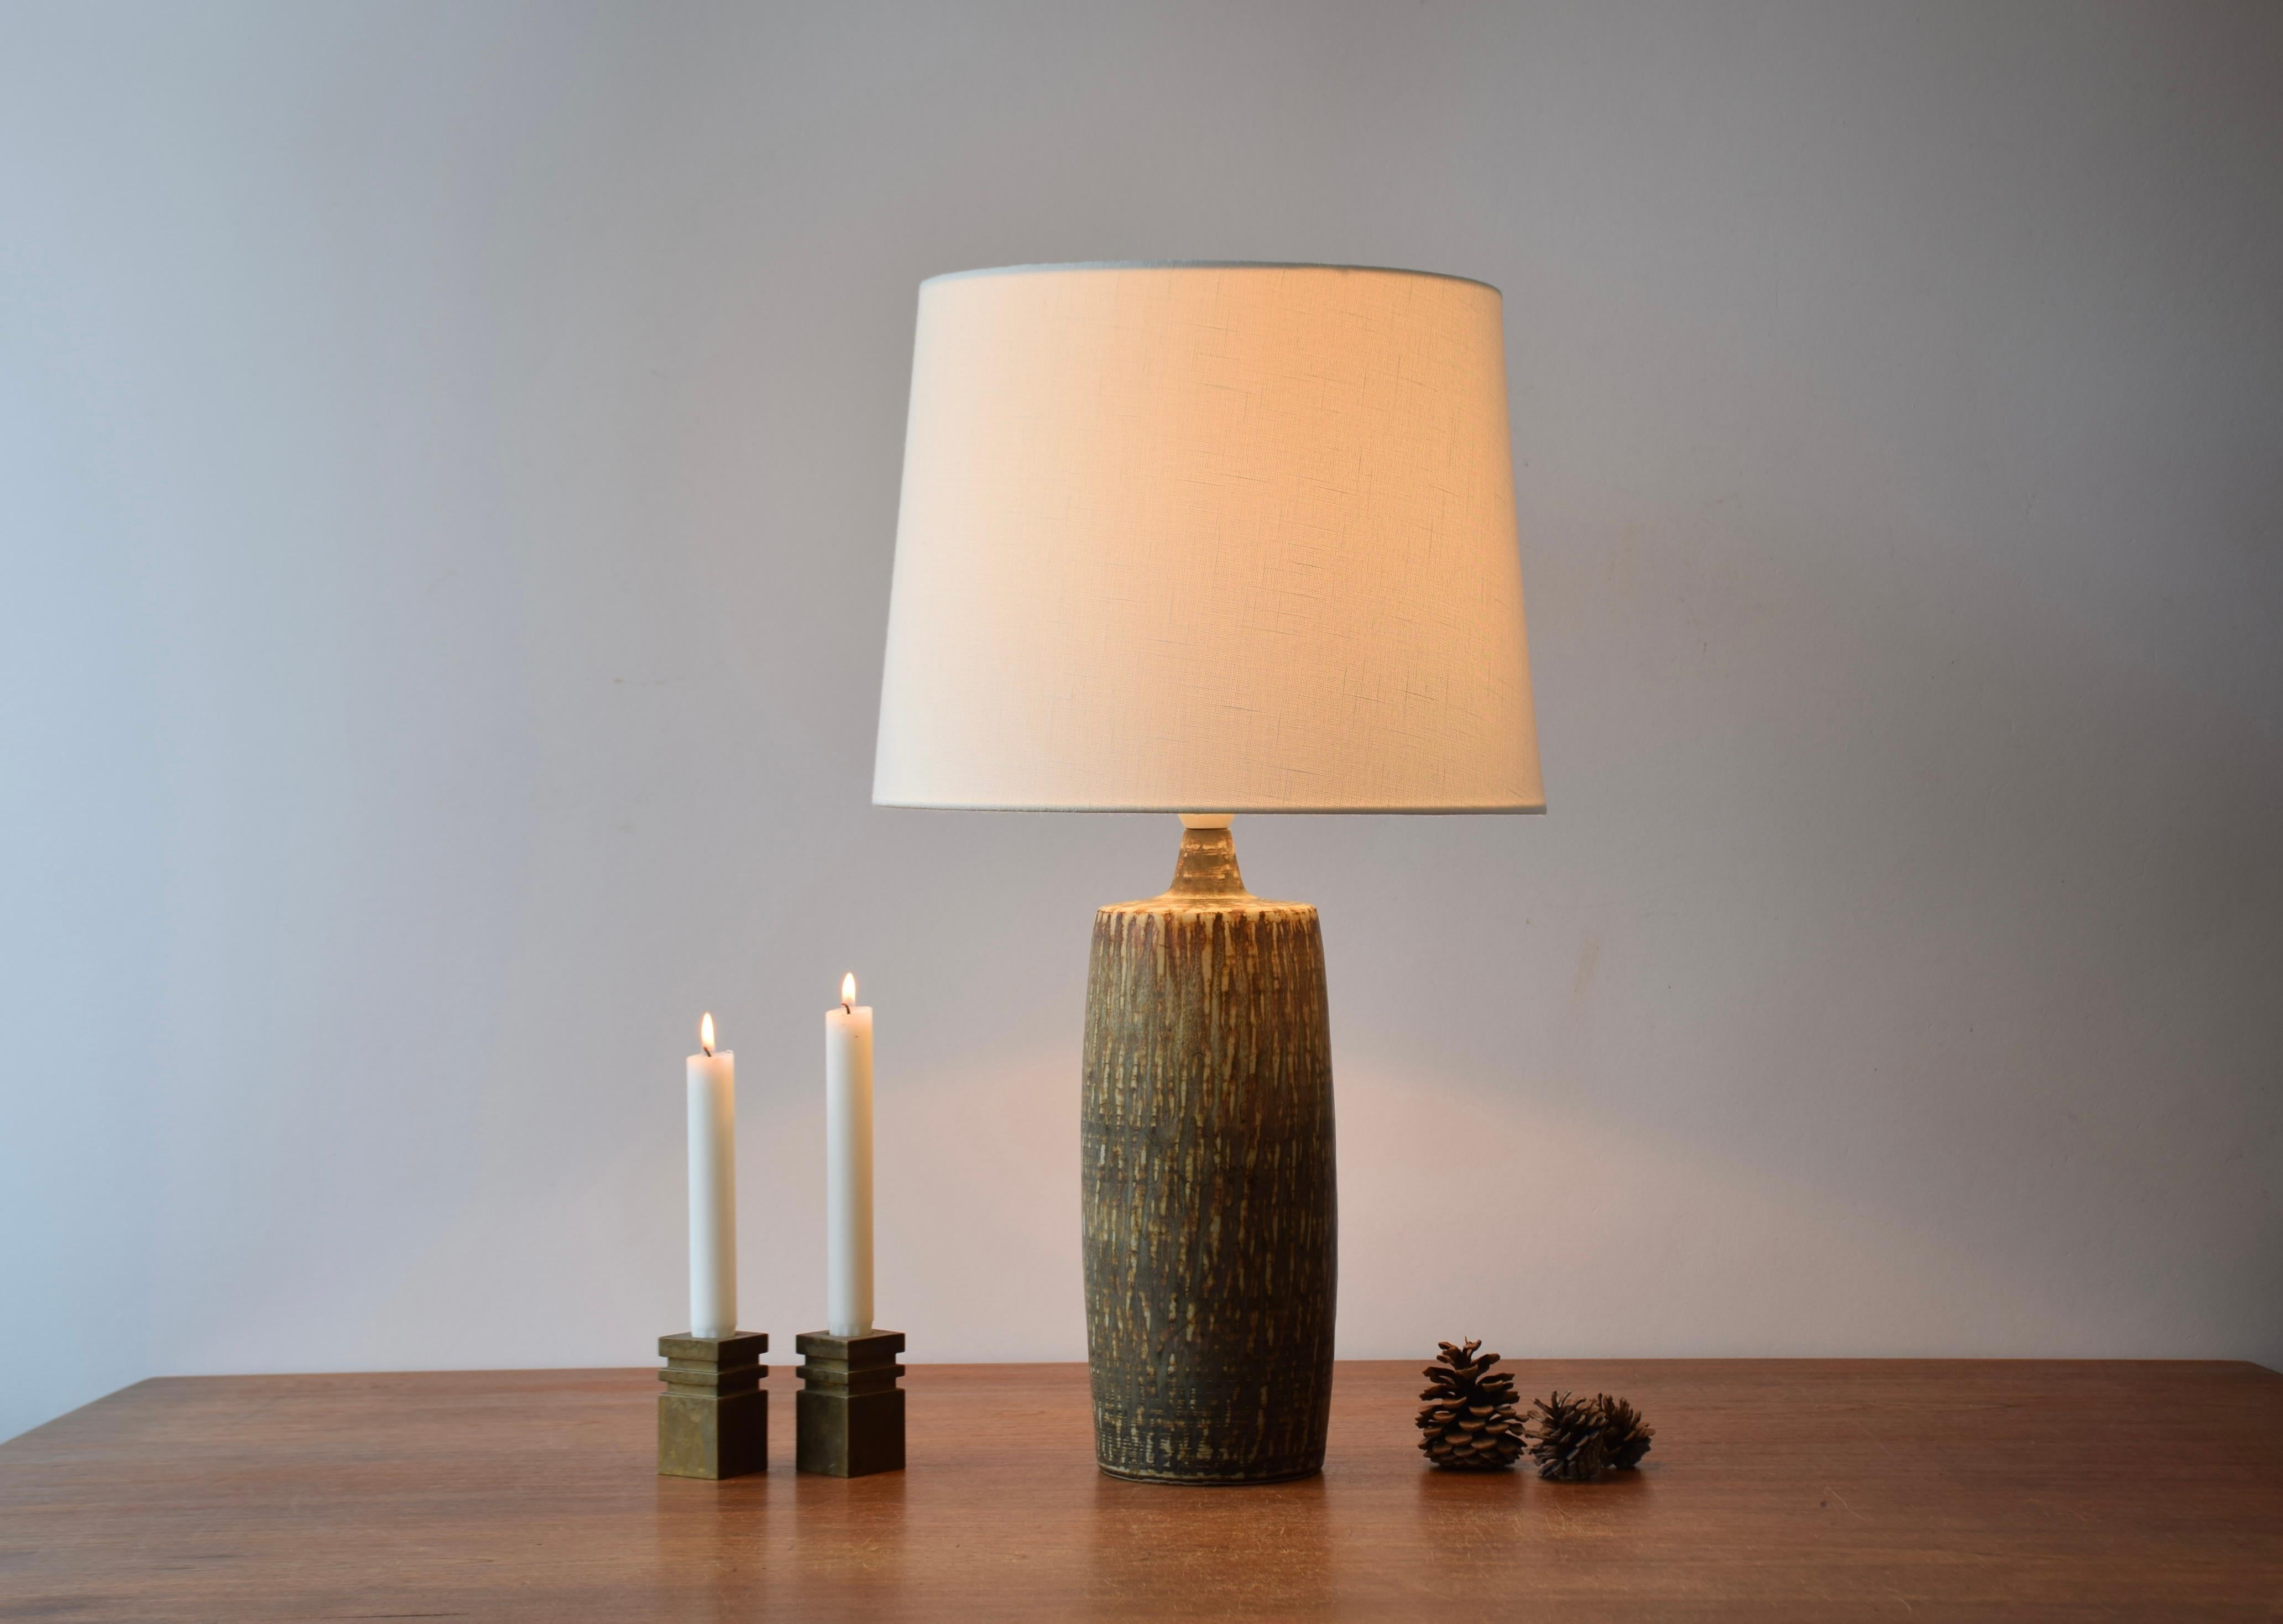 Tall ceramic table lamp by Gunnar Nylund for Rörstrand, Sweden.
It´s part of the 